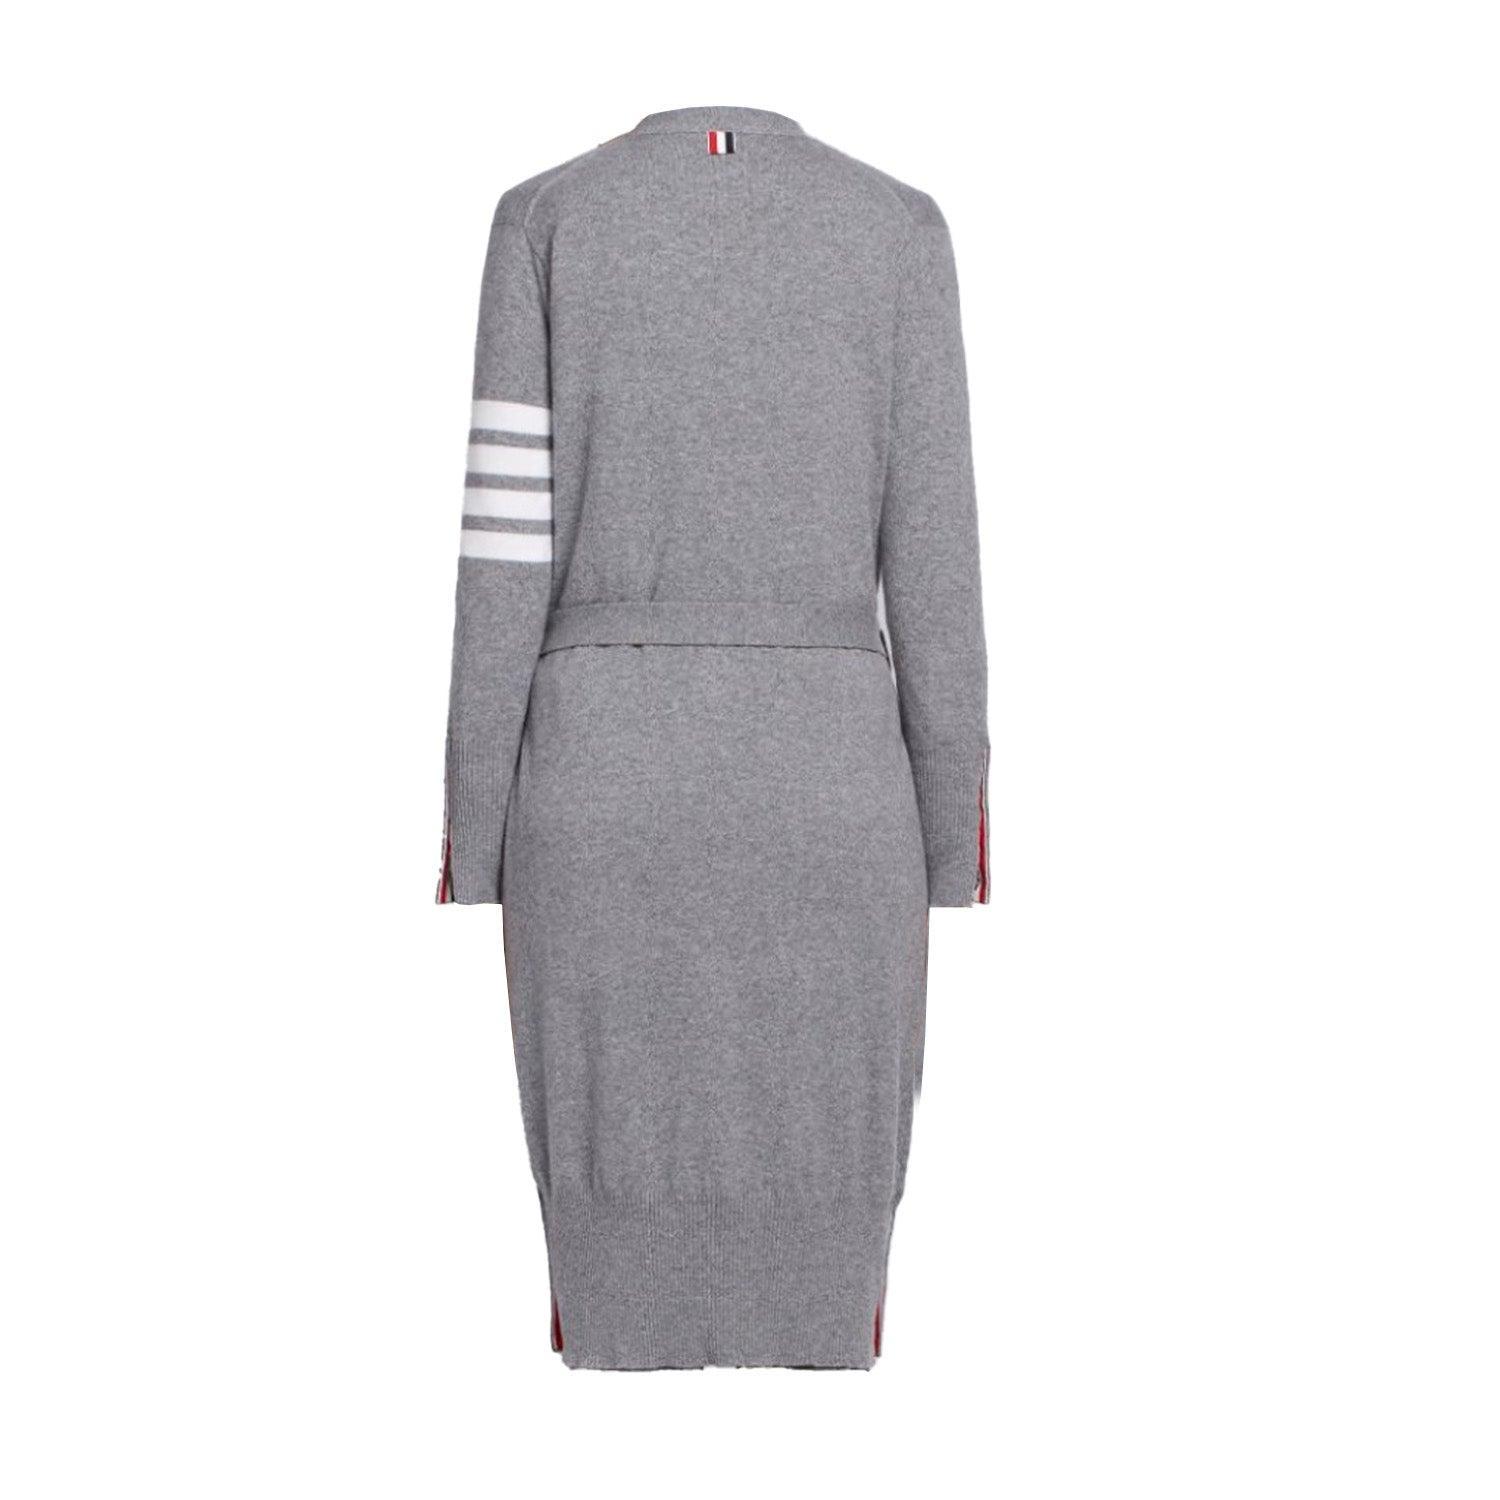 Thom Browne Cardigan - Women's 40 - Fashionably Yours